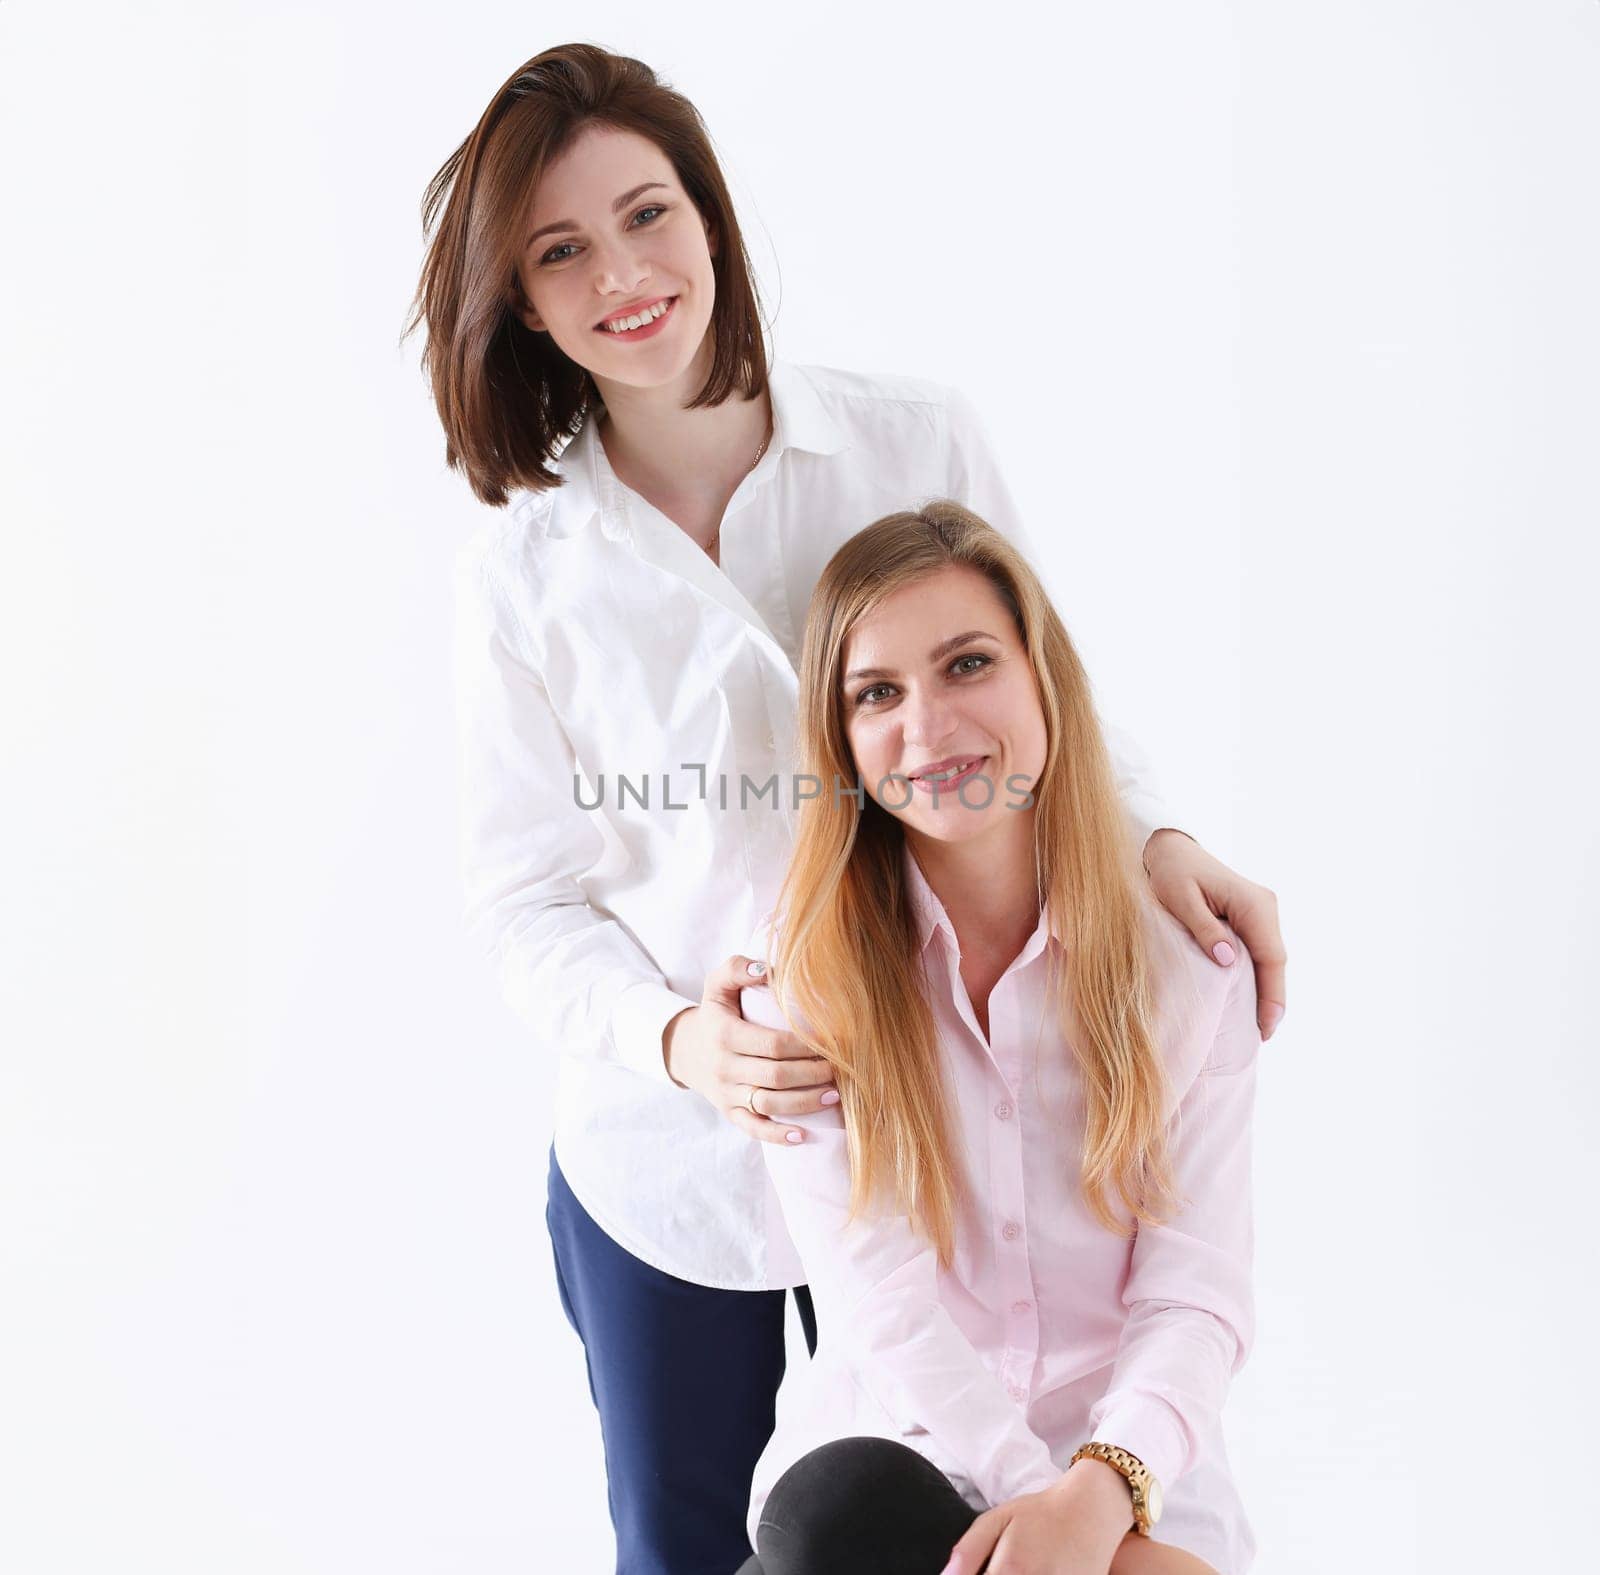 Two smiling happy joyful female friends portrait looking in camera over white background. Homosexual marriage lesbian couple love relations modern positive relationship concept